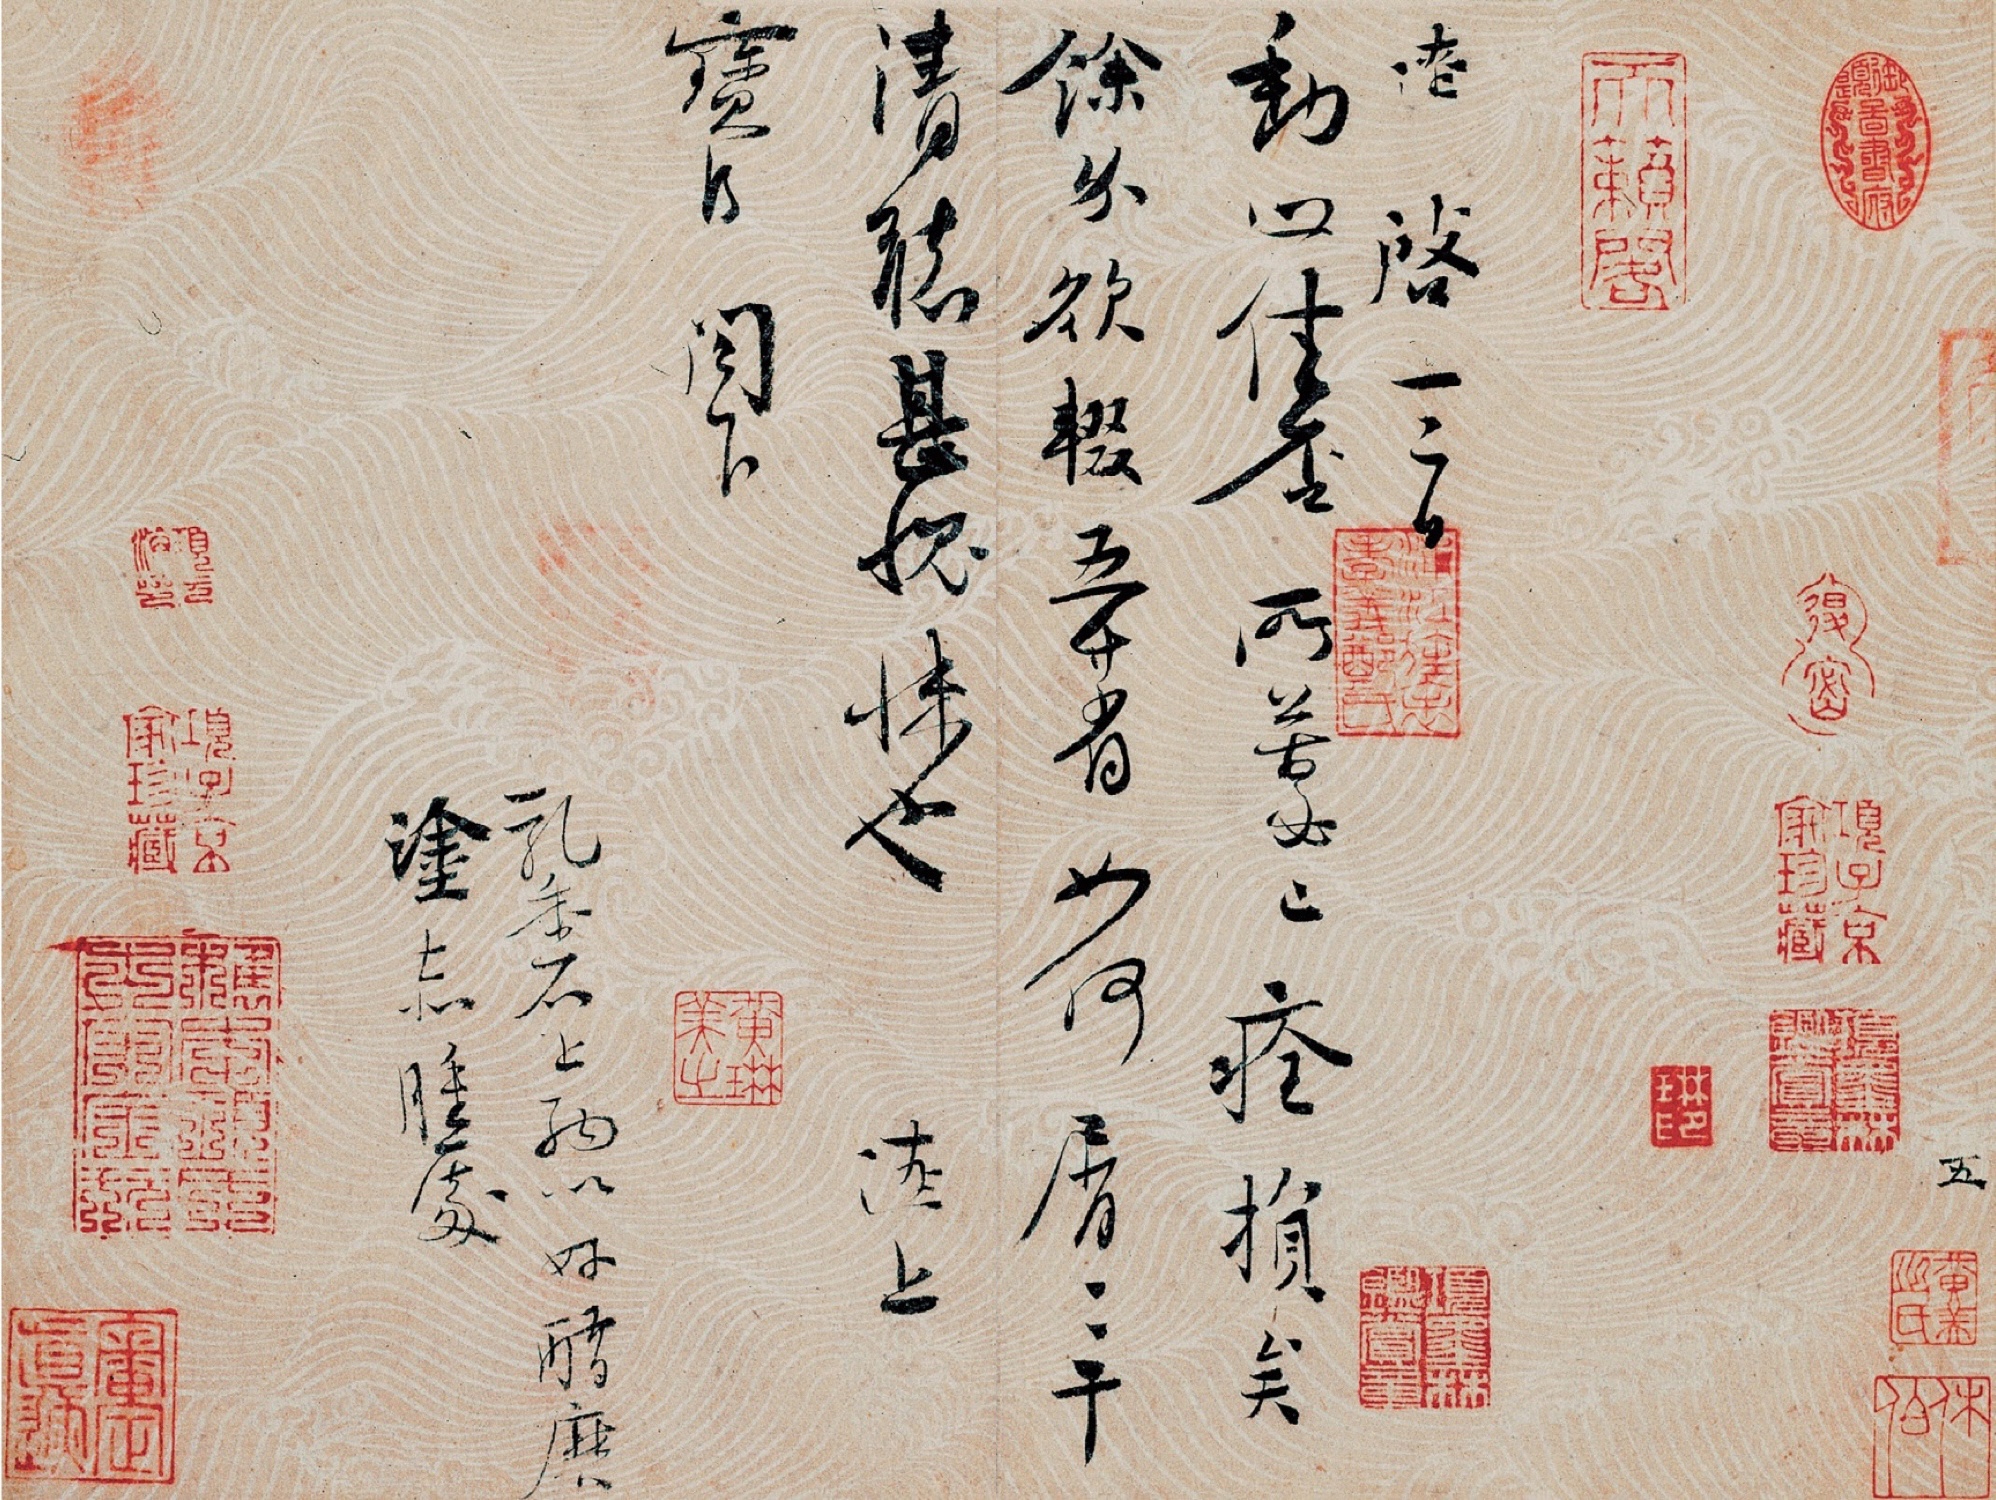 (Northern Song Dynasty) Shen Liao, running script, moving and stopping, ink and pen on paper, 27.1 cm long and 36.6 cm horizontal, collected by Shanghai Museum